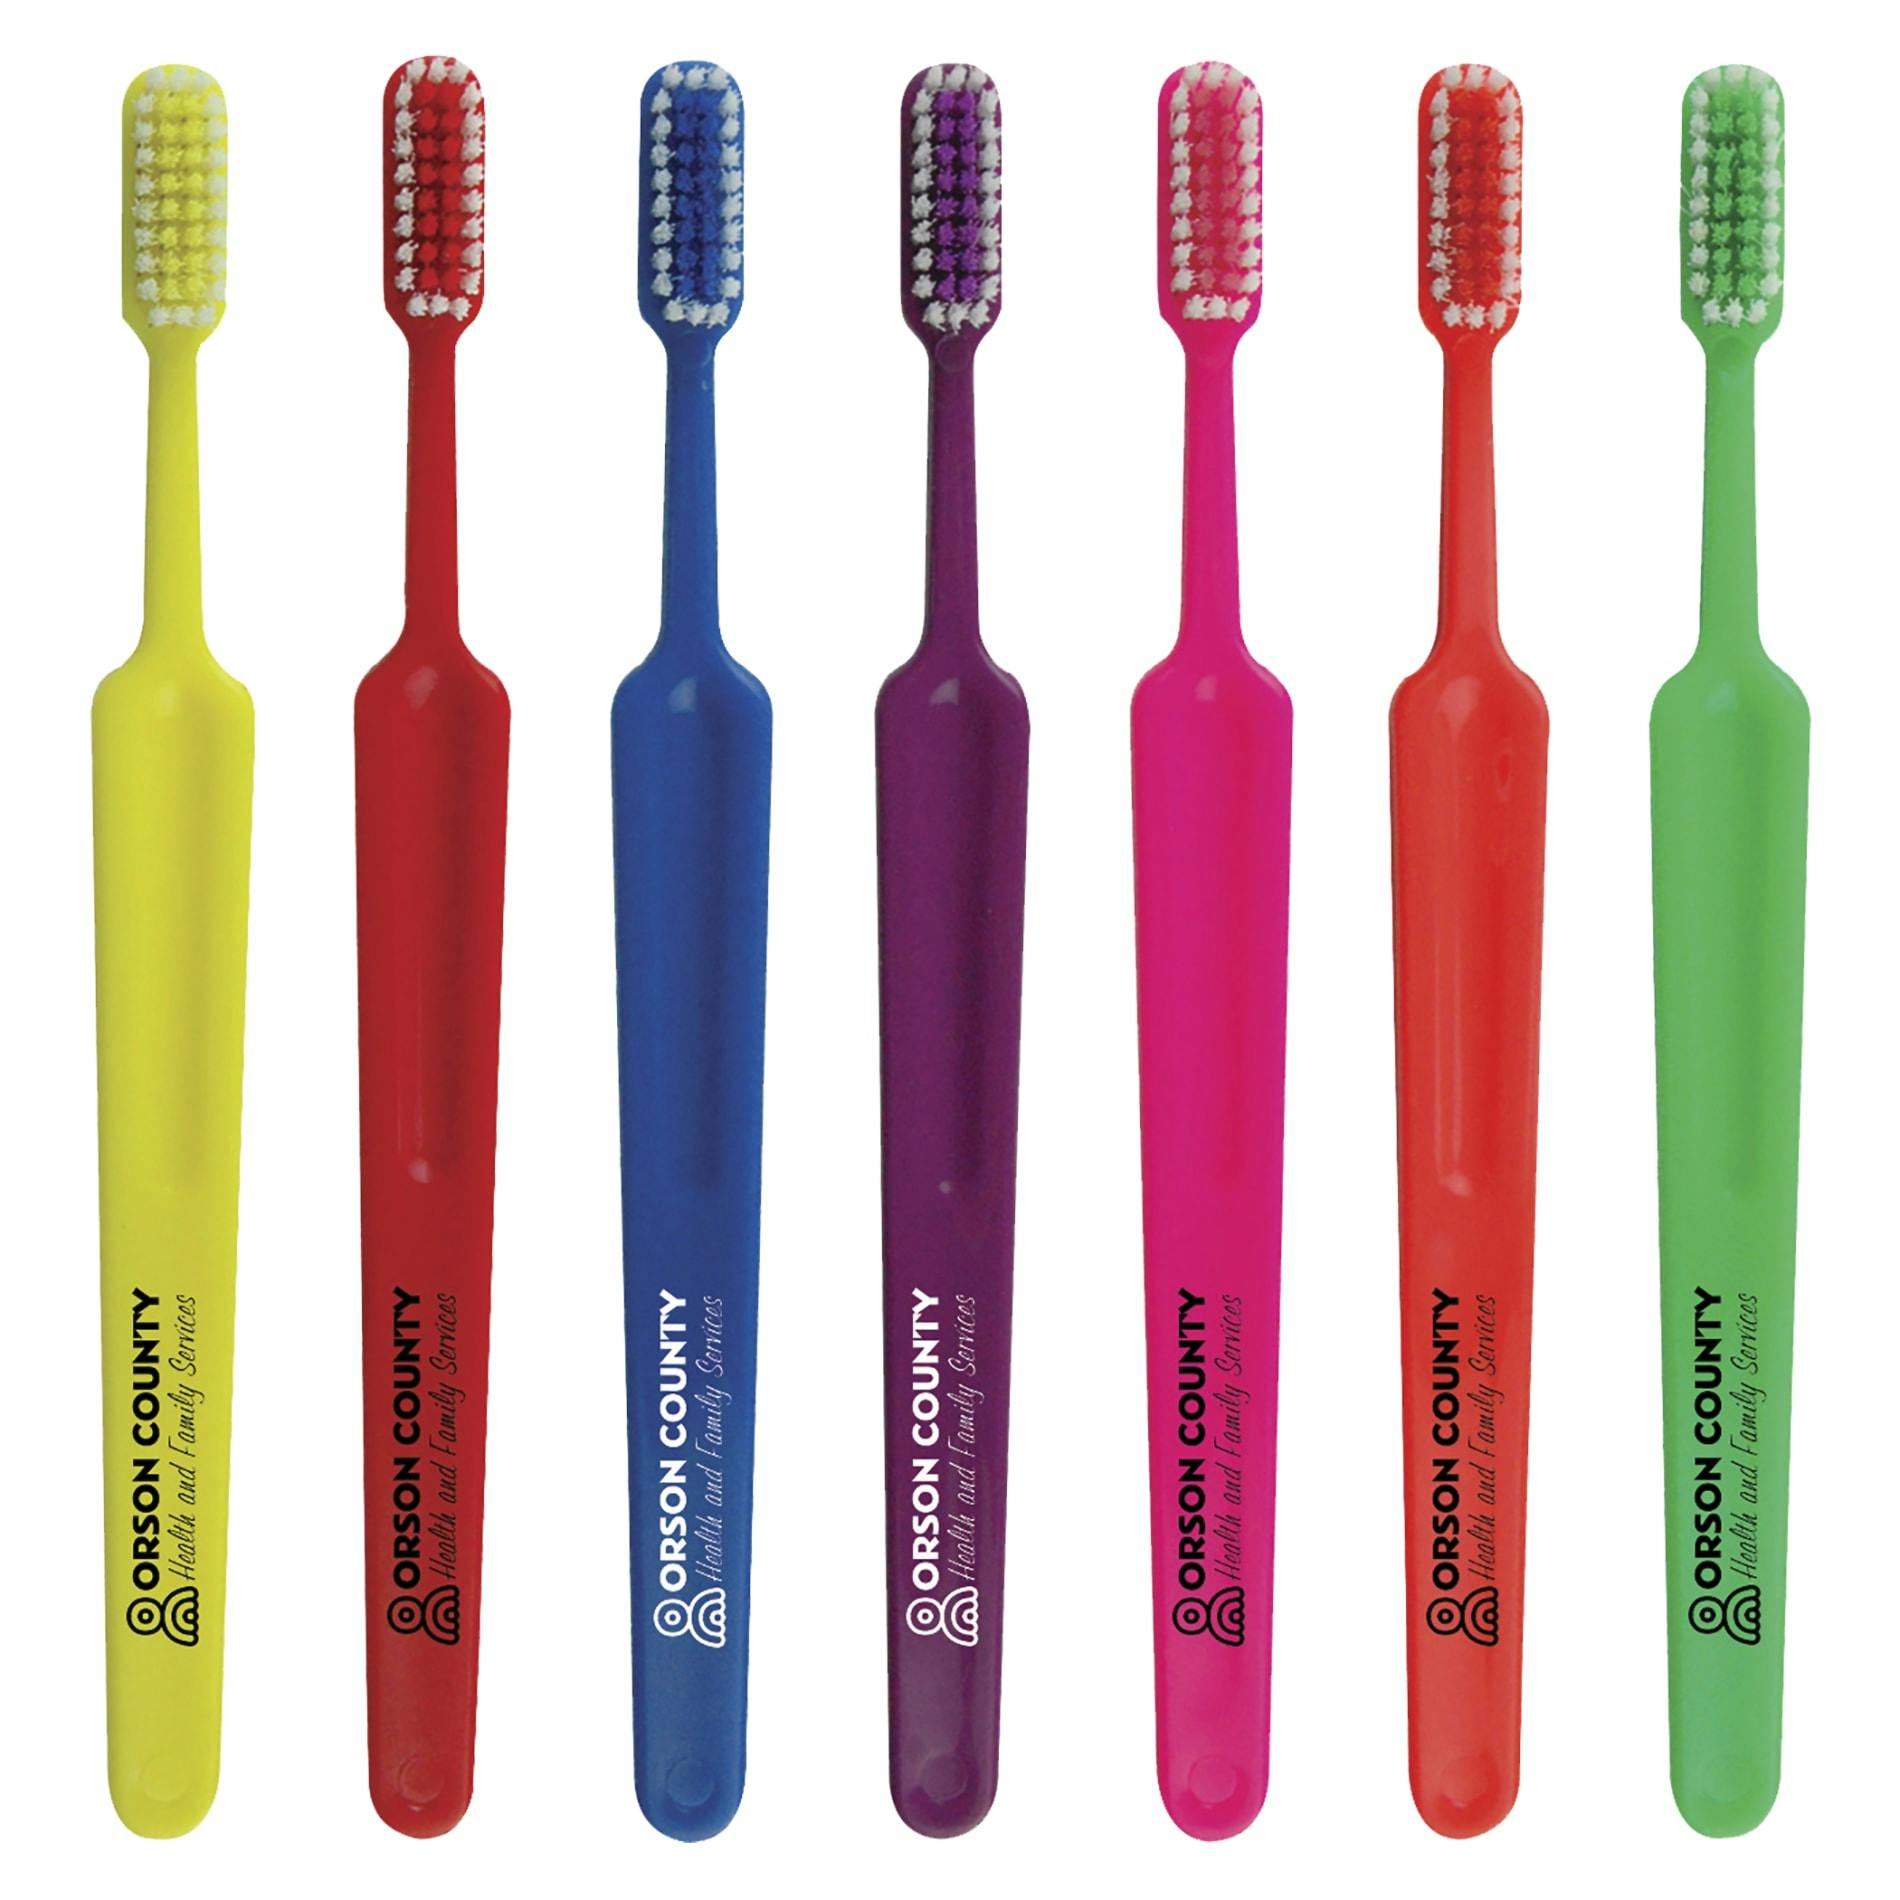 Concept Bold Toothbrush - additional Image 1